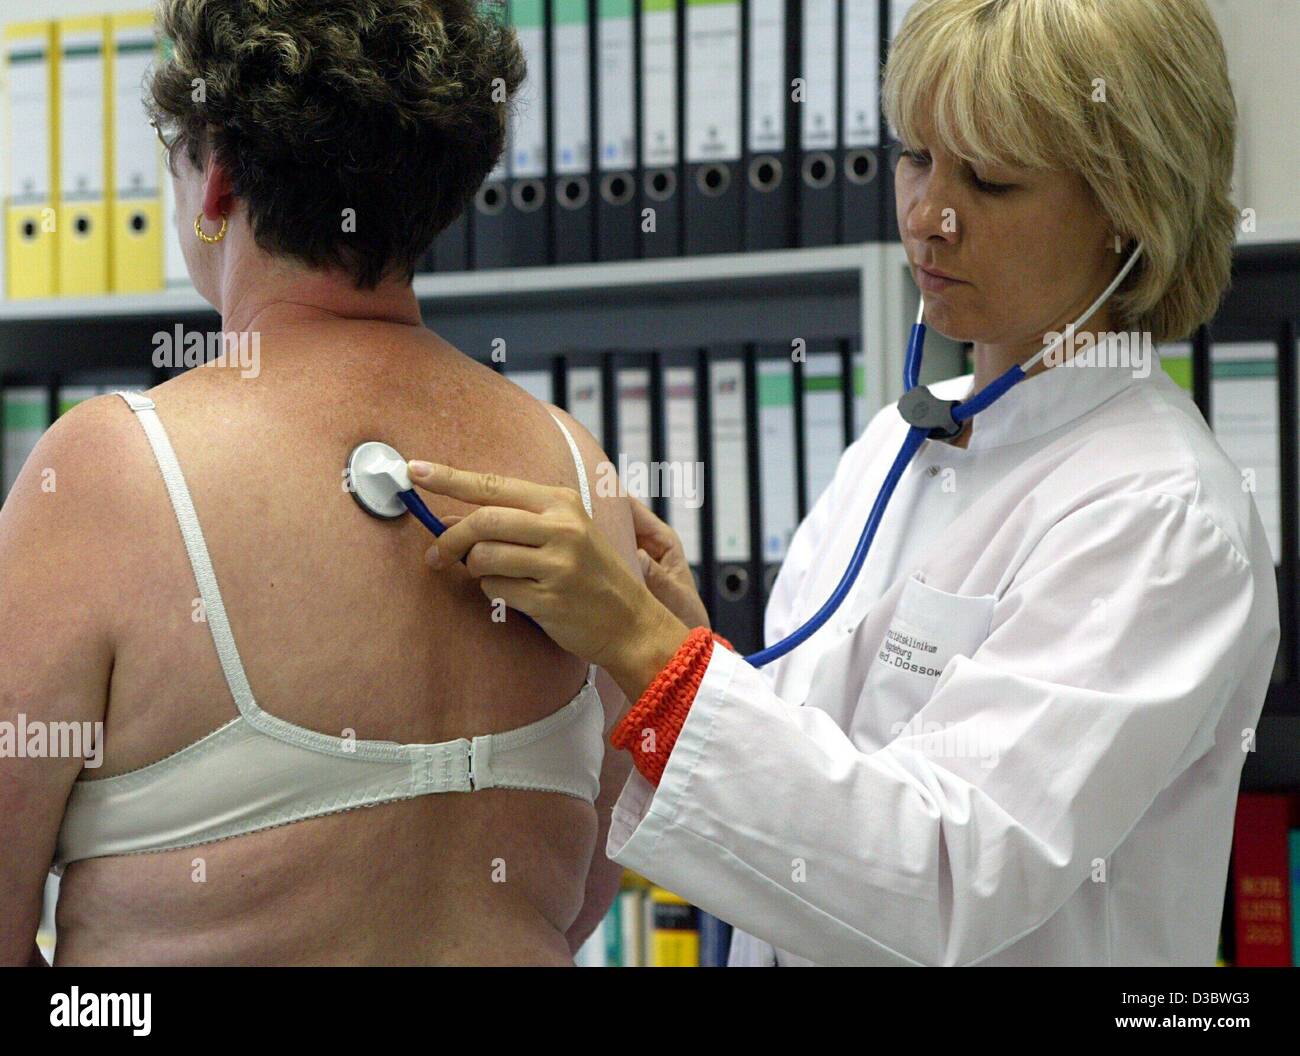 (dpa) - Doctor Birgit Dassow (R) listens to the breathing of patient Ilona Fieber at a practice in Magdeburg, Germany, 21 August 2003. The envisaged healthcare reform of the German government will result in deep cuts in the health and welfare systems. Germany's expensive healthcare system which is f Stock Photo